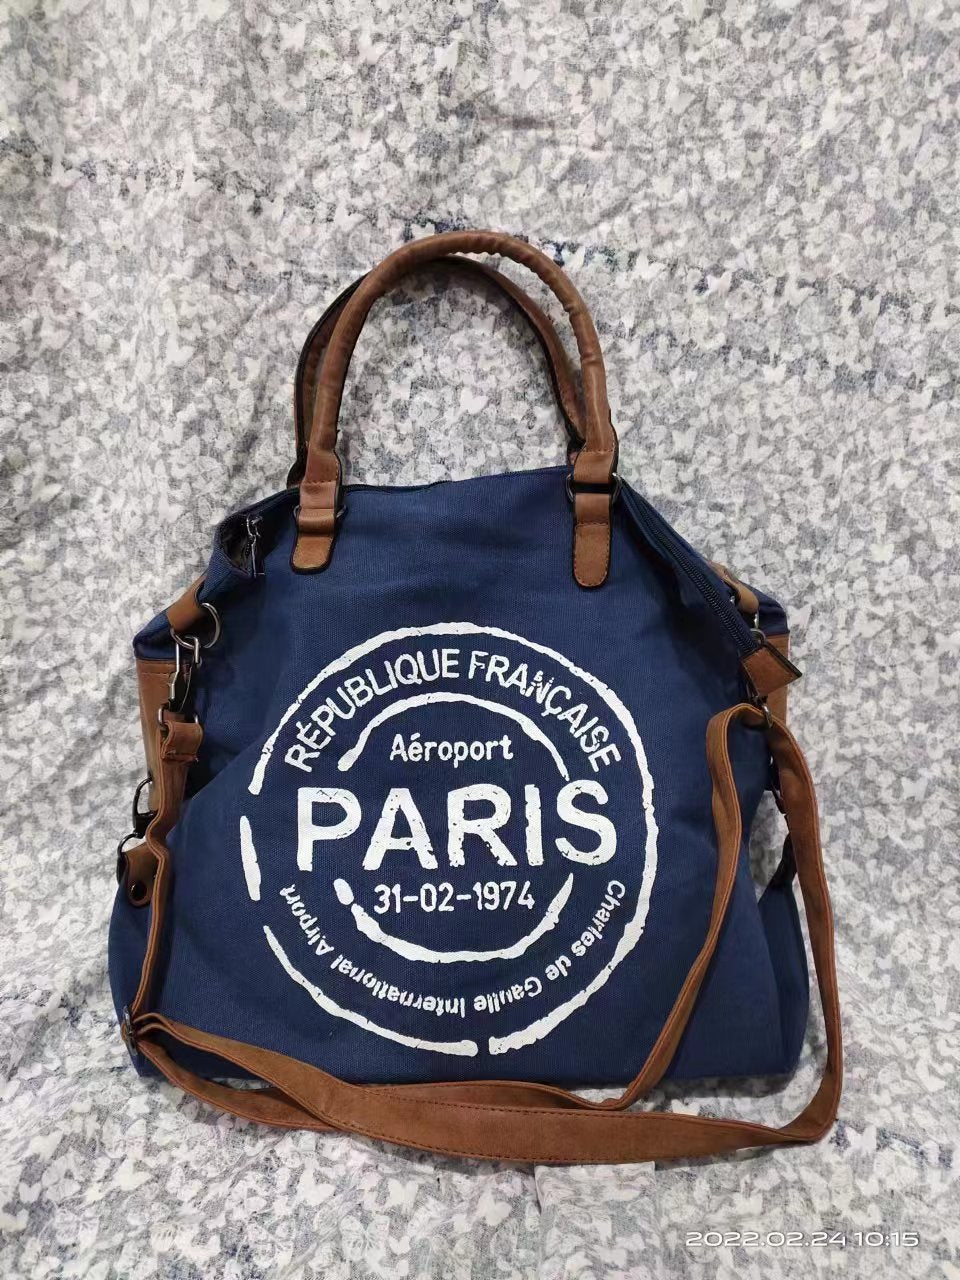 Top Quality Multifunctional Canvas Bags Printed Letters Travel Bags Vintage Style Shoulder Bags Handbags Tote Drop Shipping